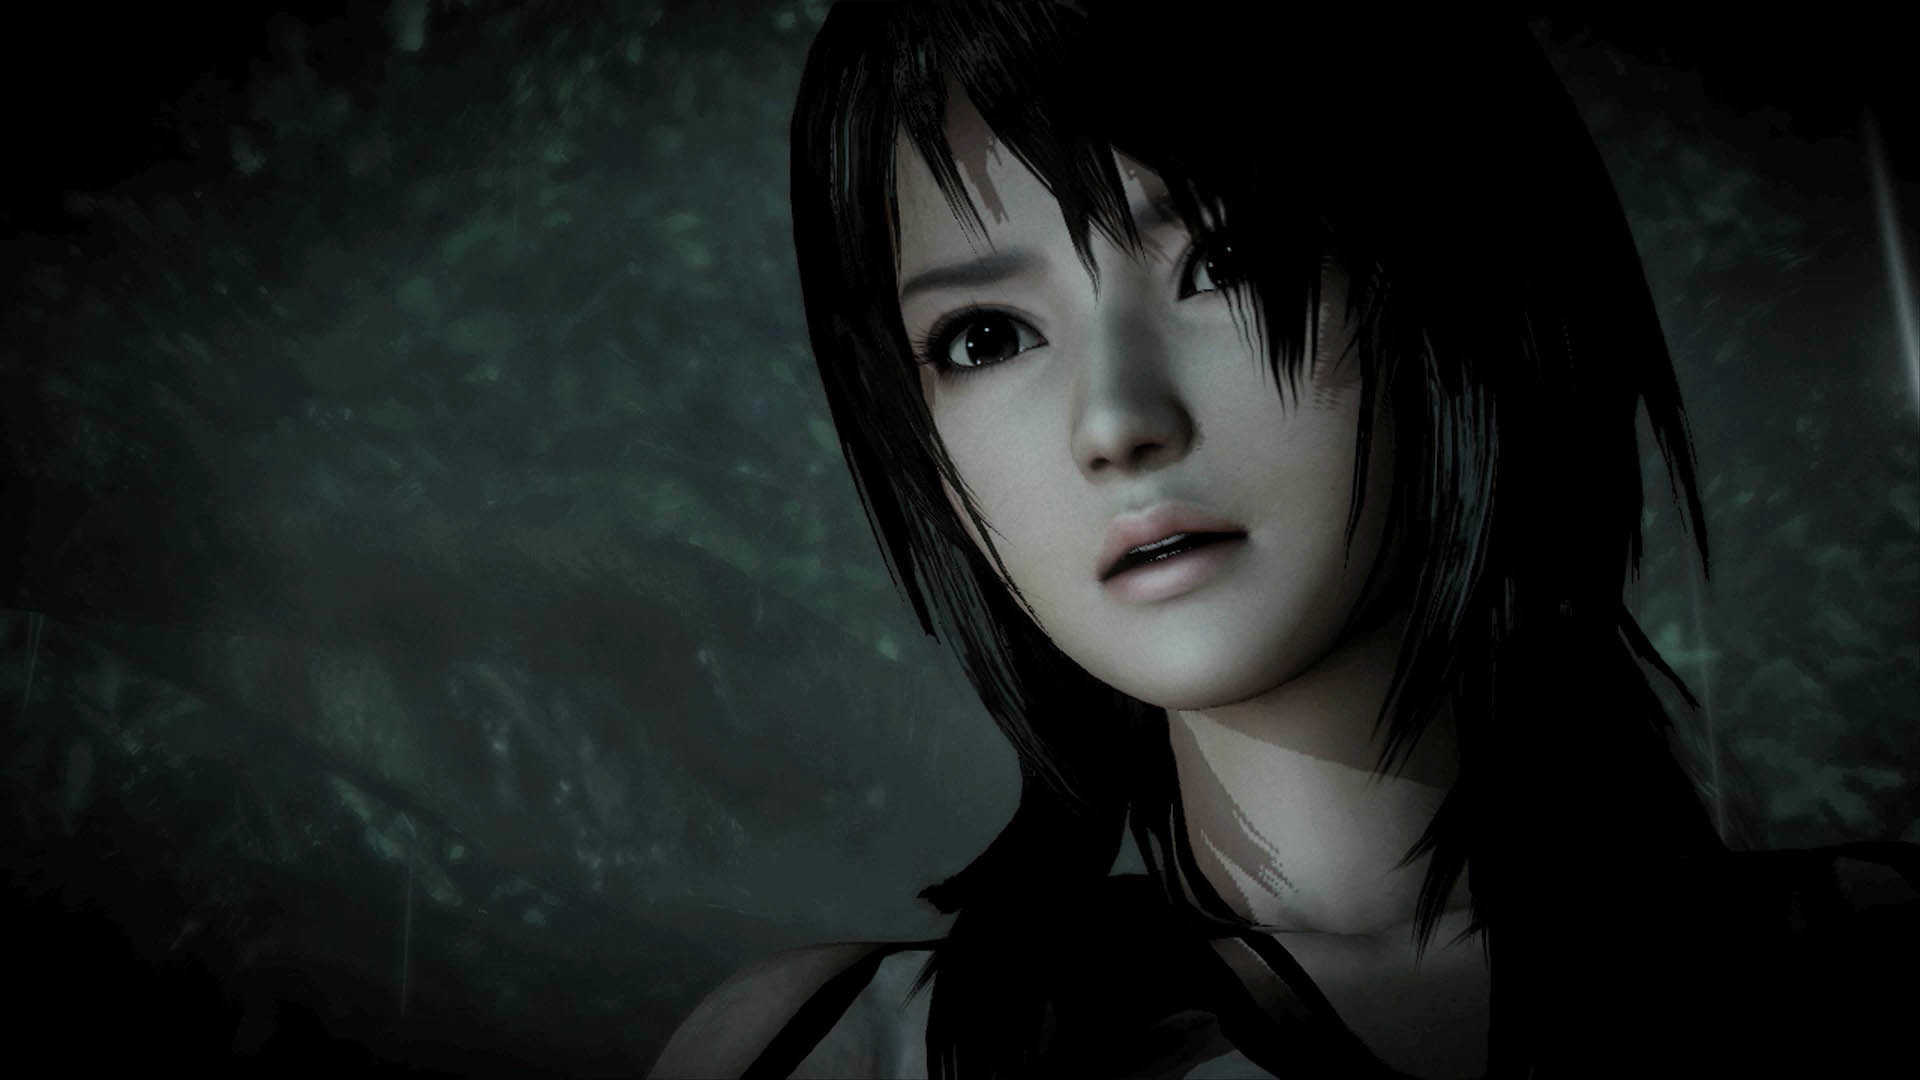 1920x1080 fatal frame 5 wallpaper - photo #31. The Wii U Exclusive Comes To North  America This Fall .